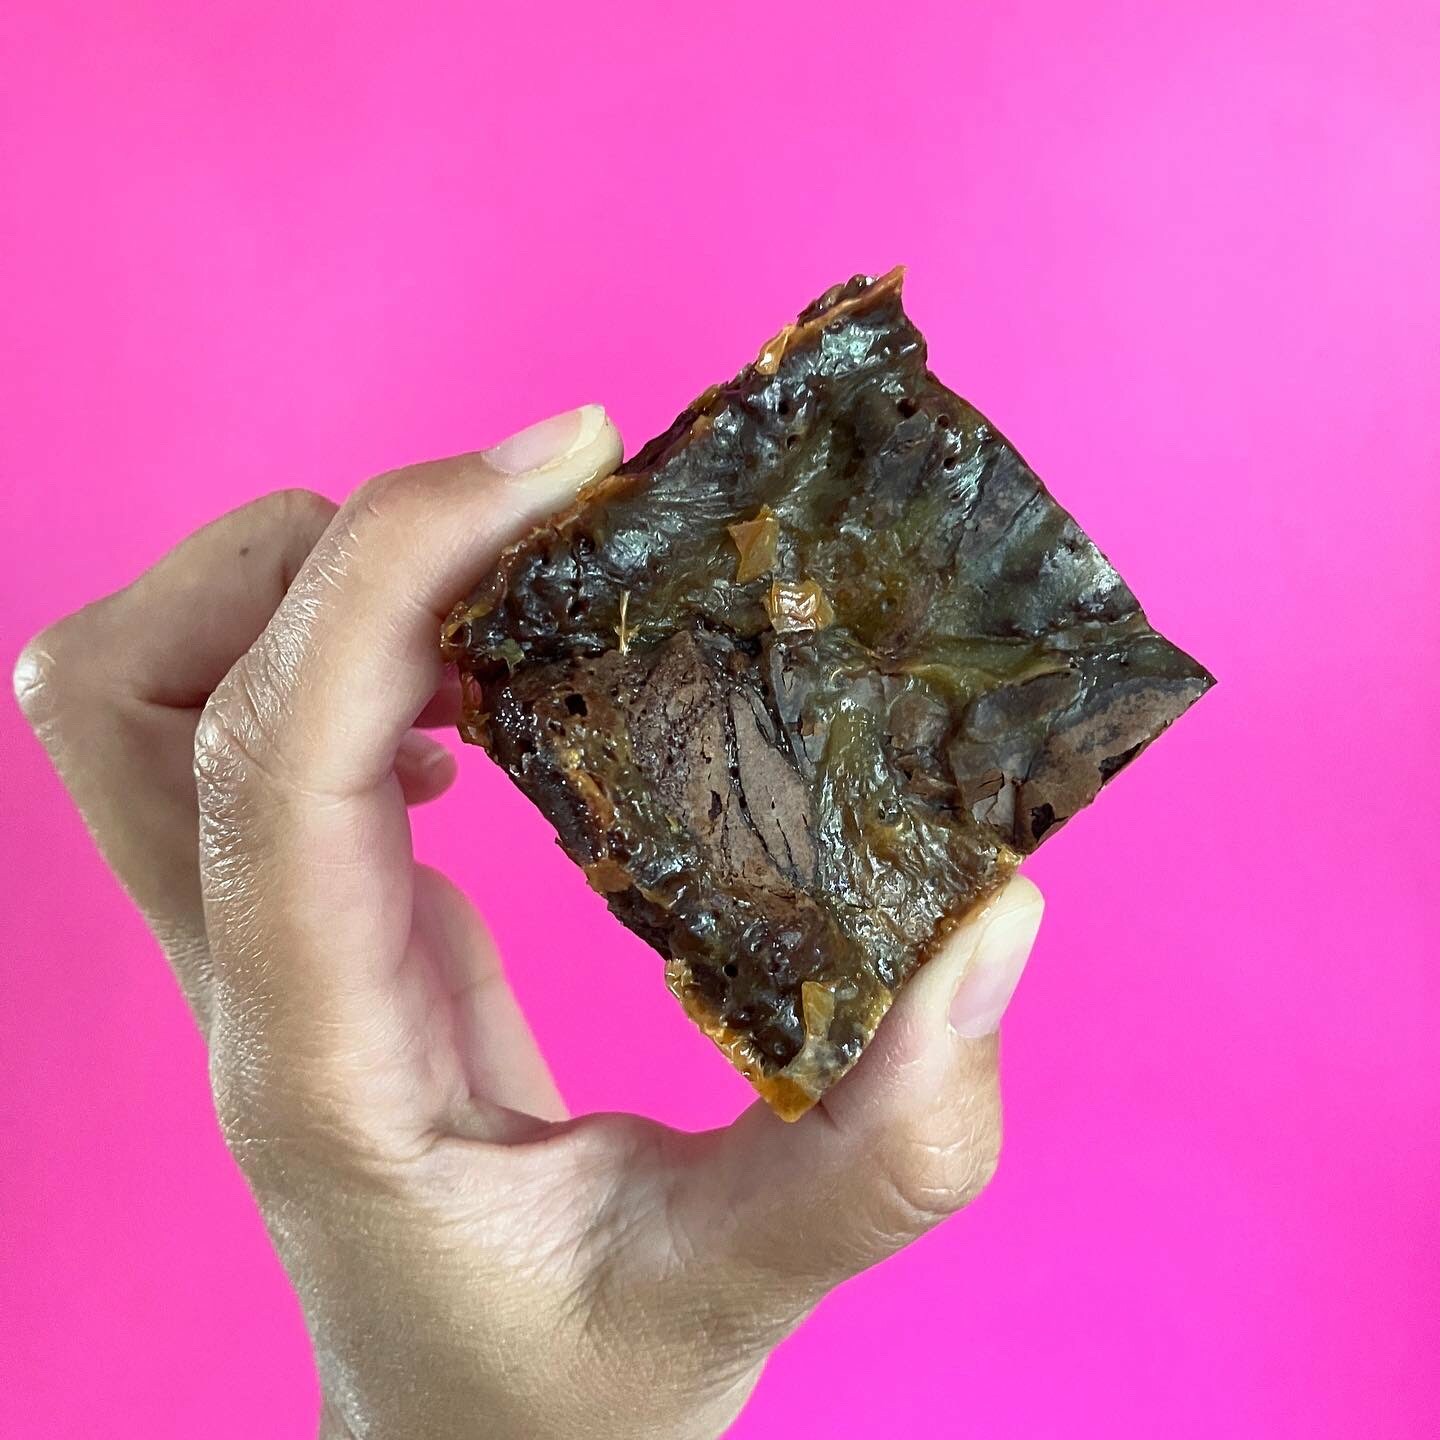 Malted Caramel Brownie being held up by a hand on a pink background.